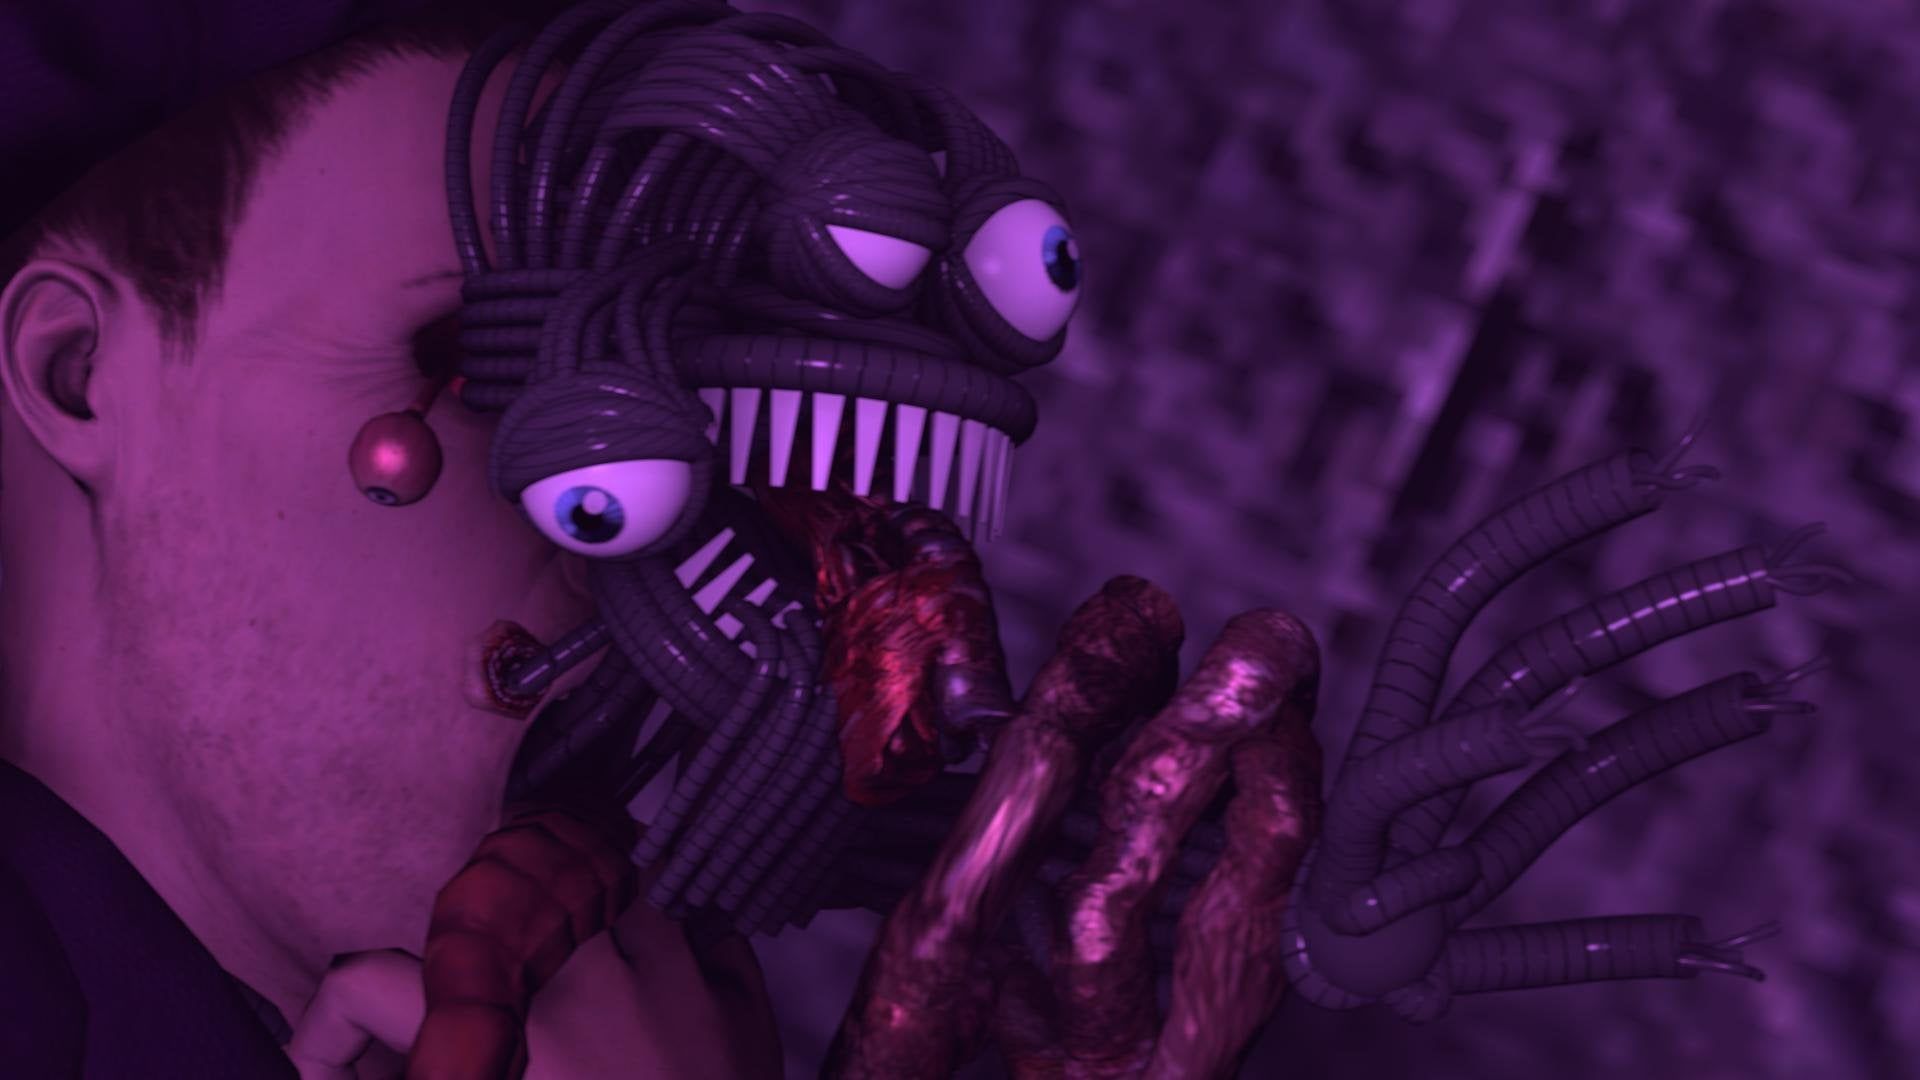 SPOILERS] [GORE WARNING] lol i noticed that most of my sfm posters